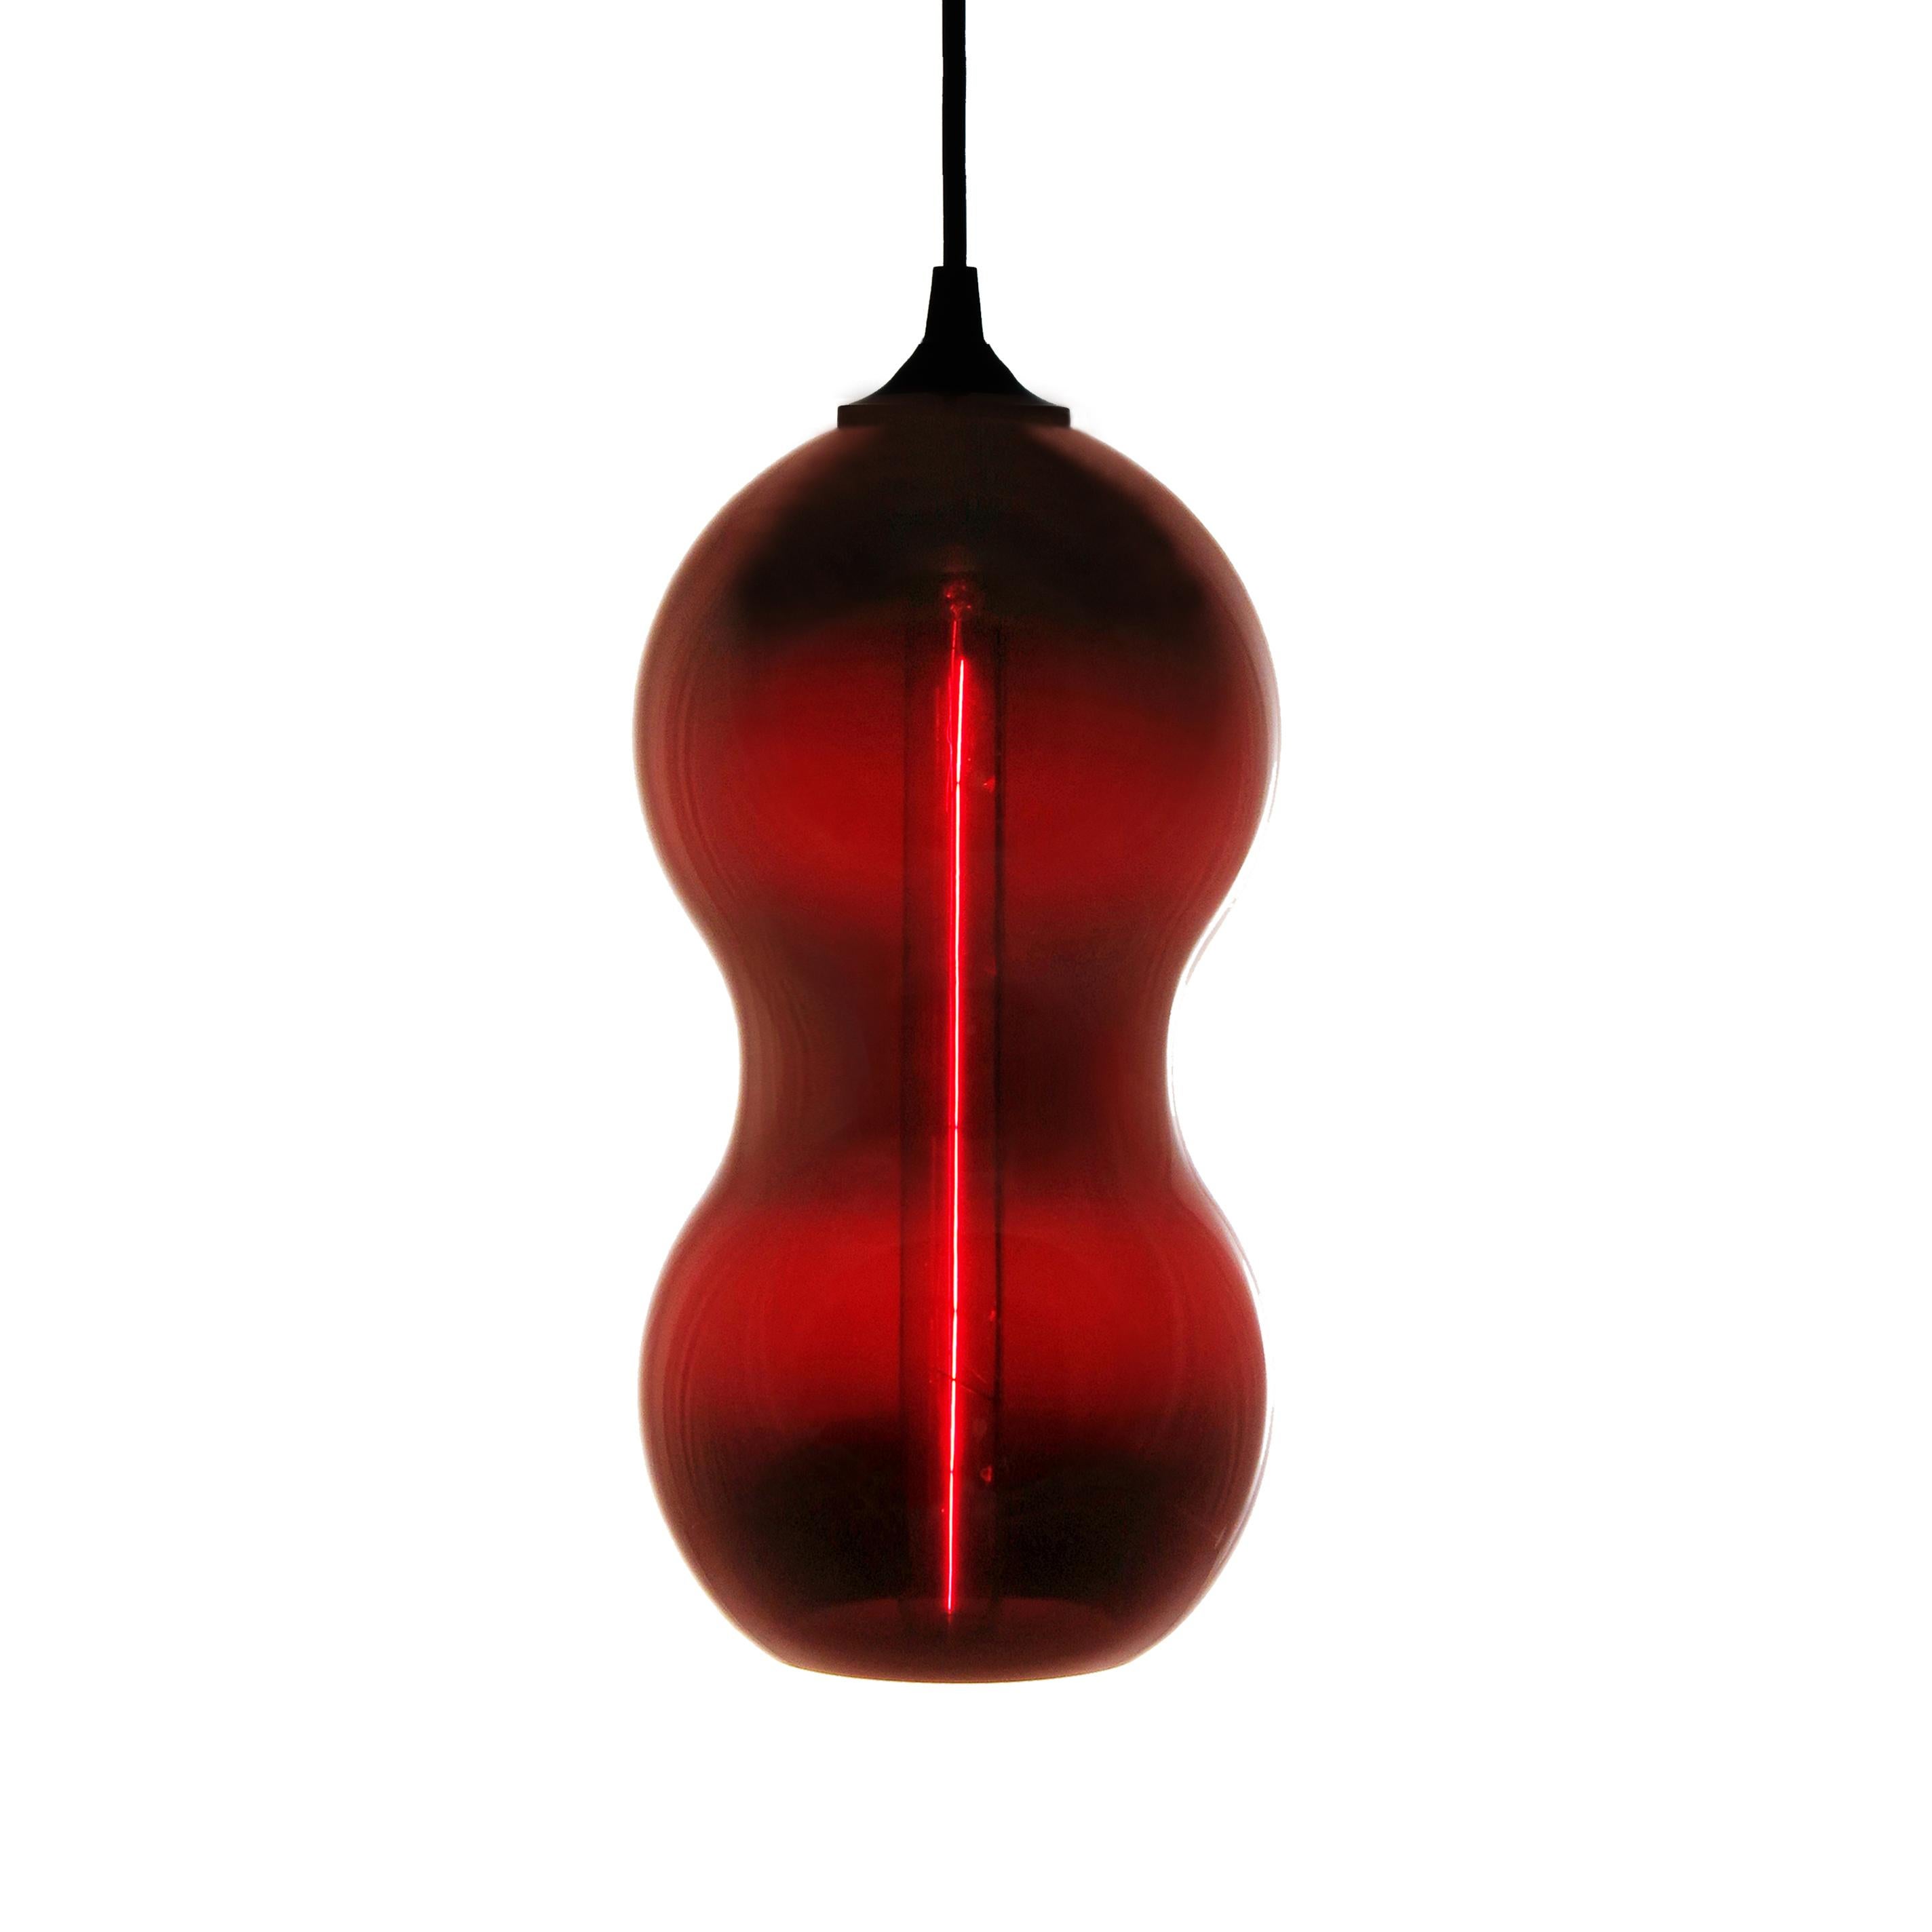 Blown Glass Neutral Olive Contemporary Organic Architectural Hand Blown Pendant Lamp For Sale